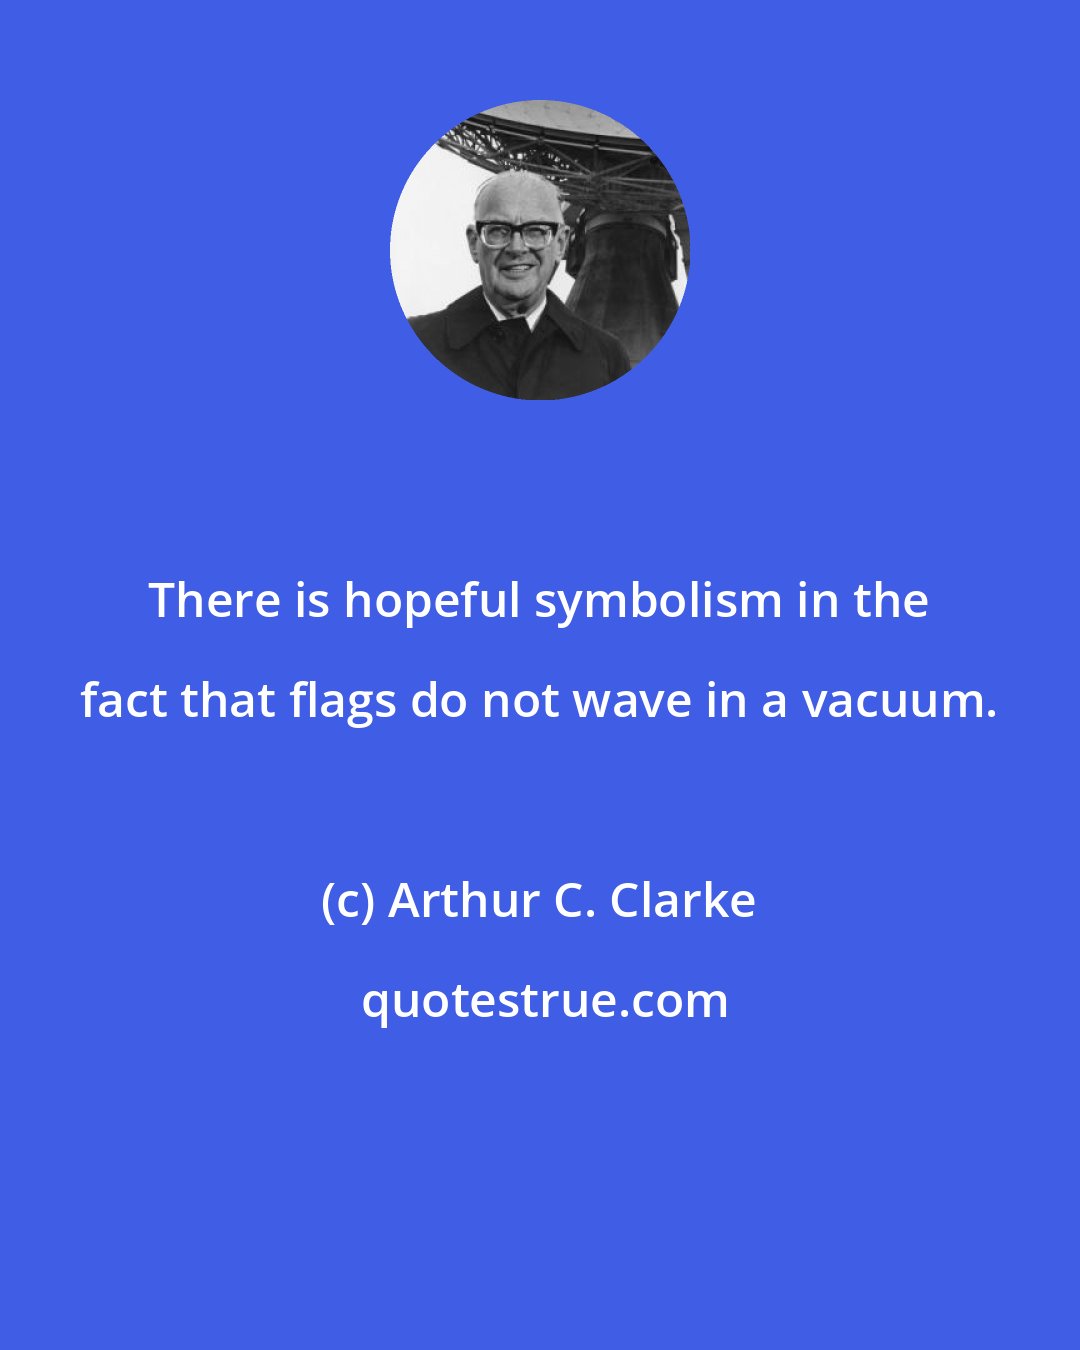 Arthur C. Clarke: There is hopeful symbolism in the fact that flags do not wave in a vacuum.